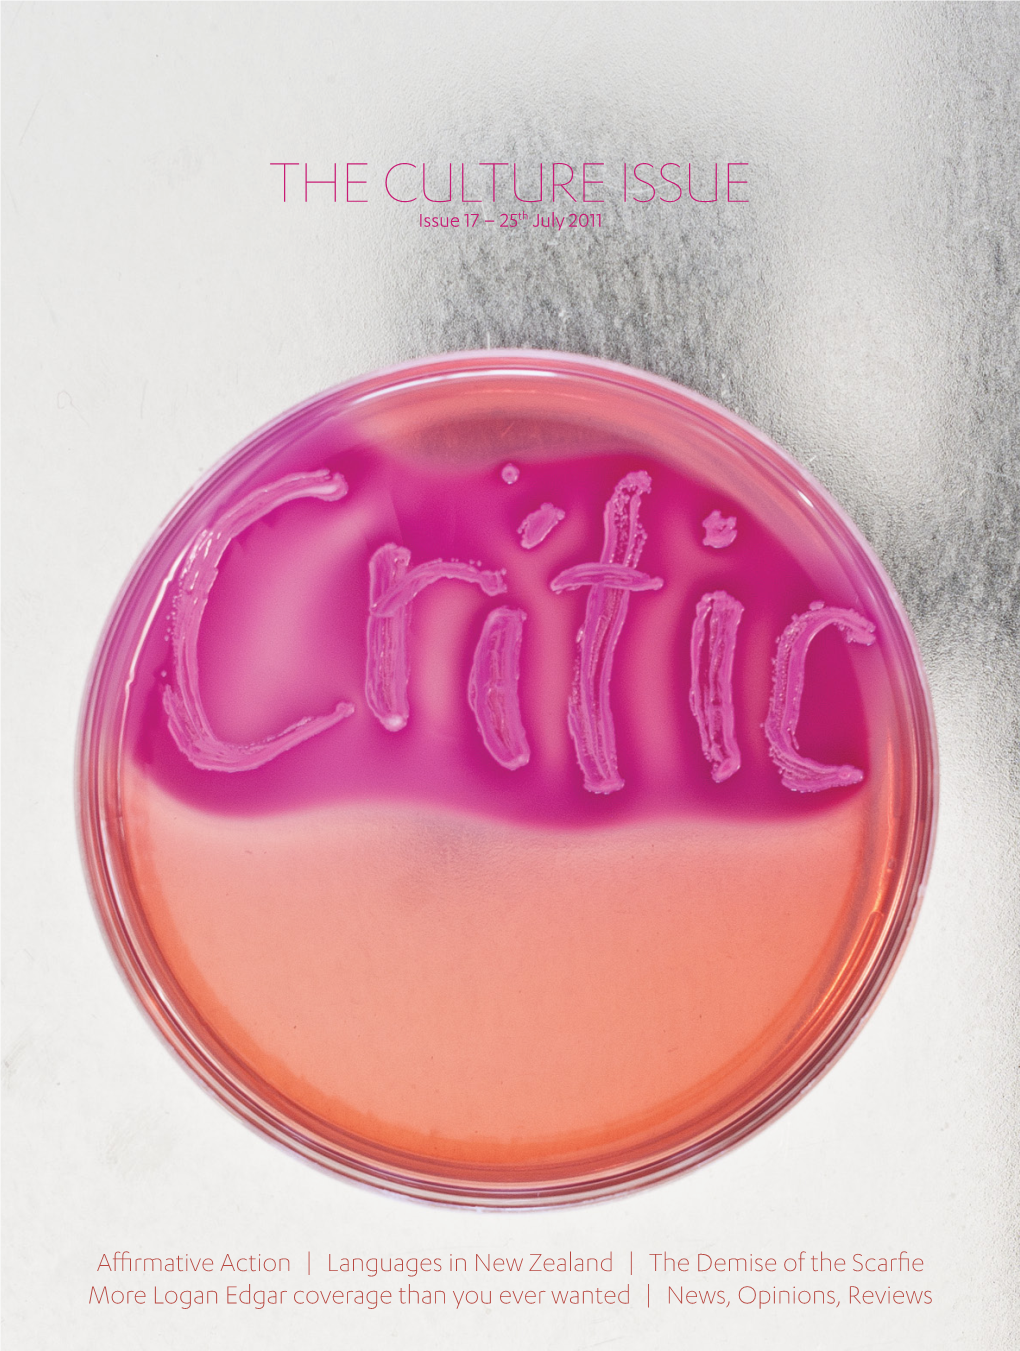 THE CULTURE ISSUE Issue 17 – 25Th July 2011